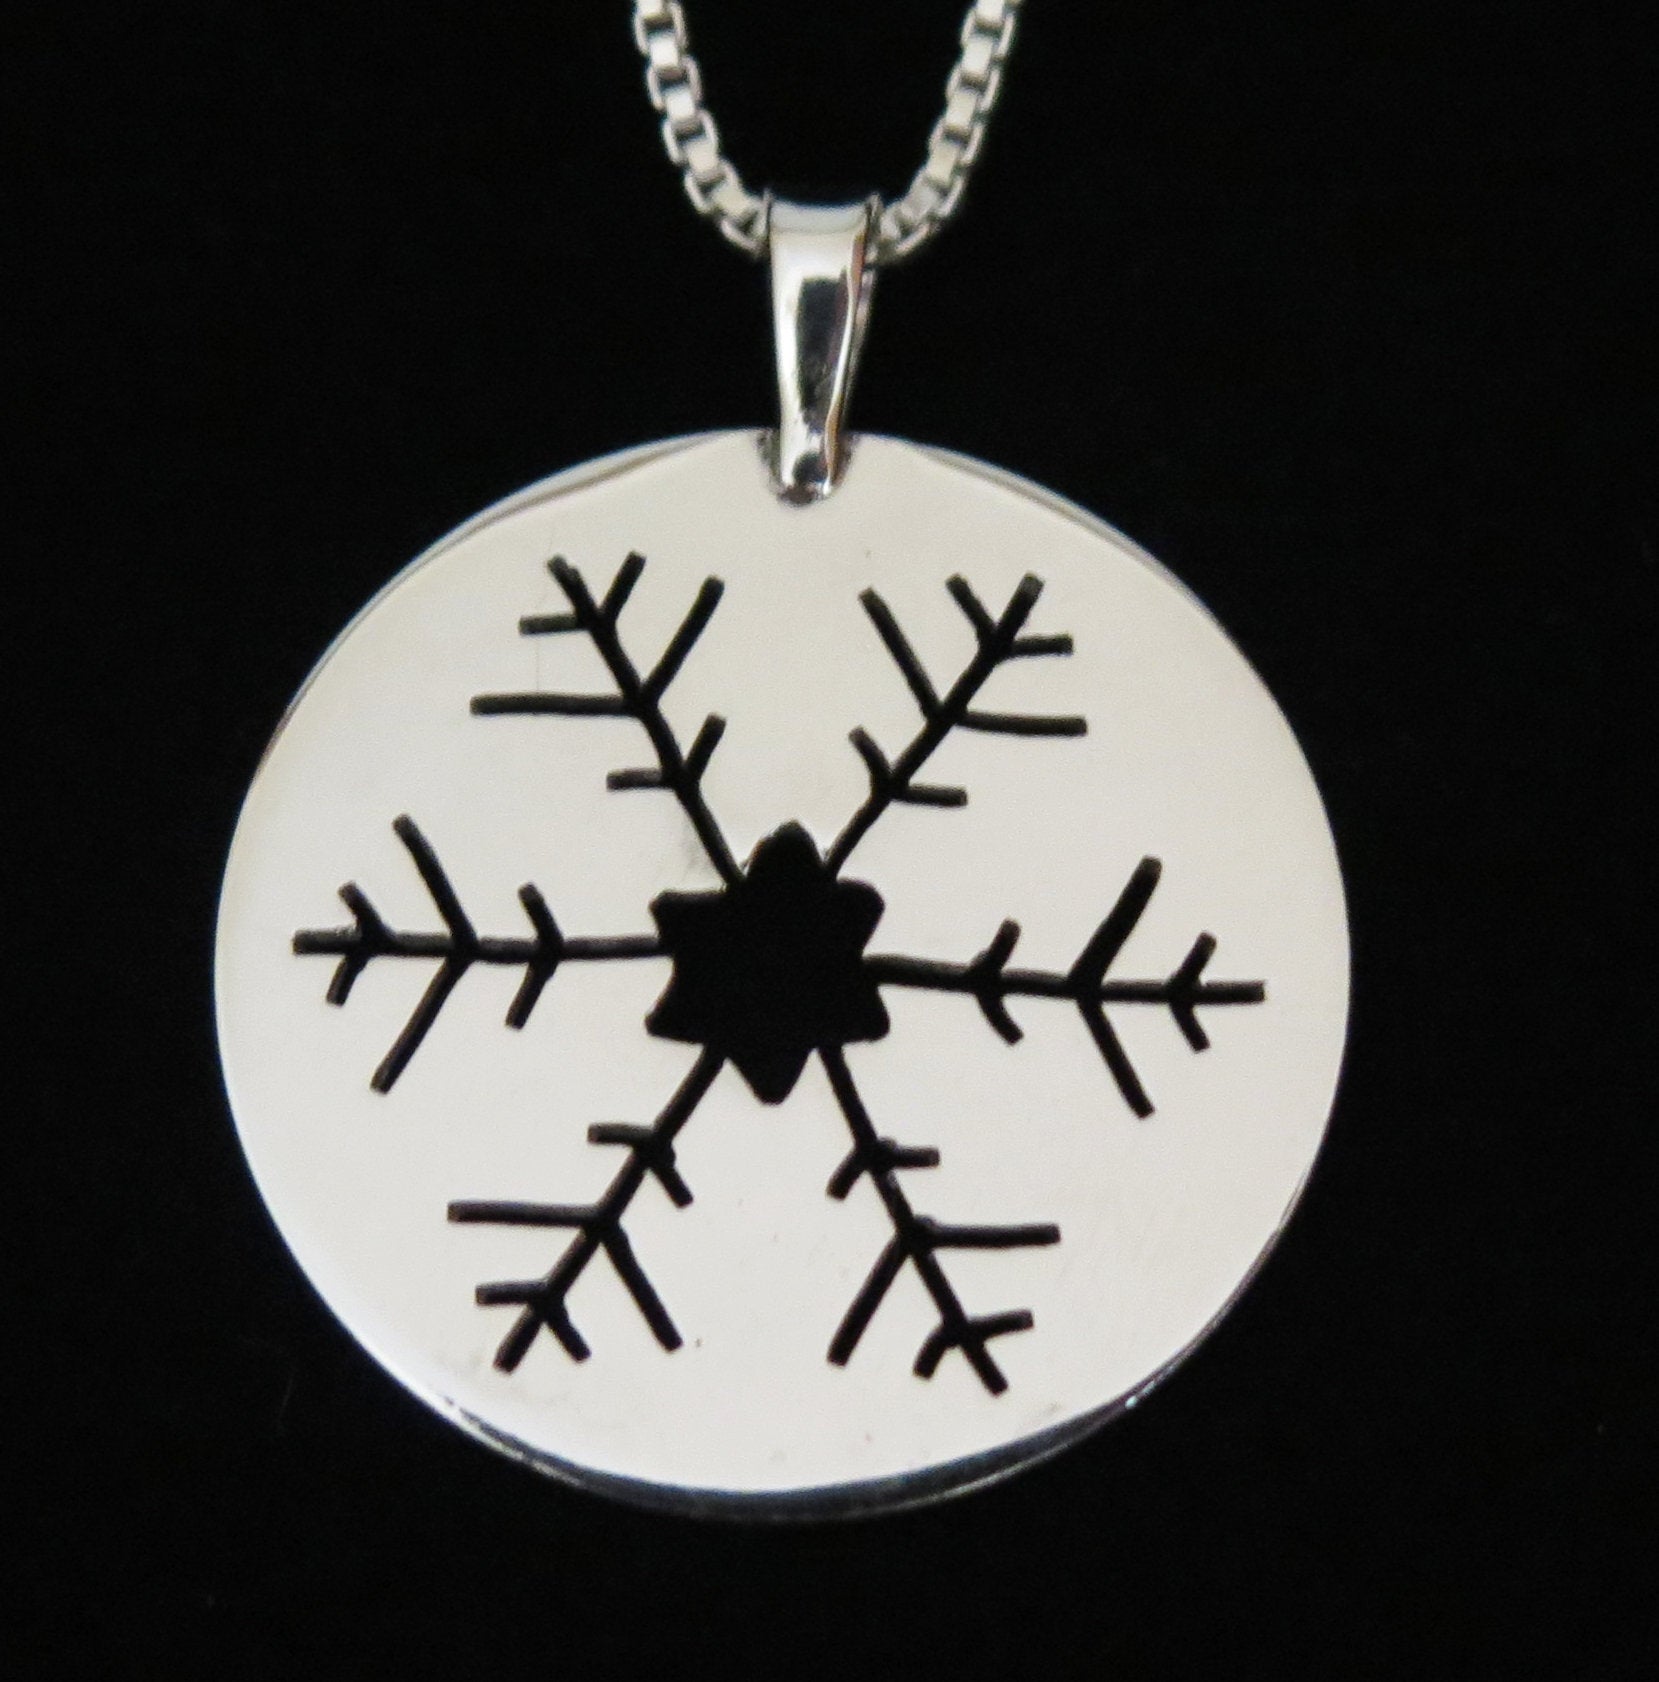 snowflake silhouette hand sawn in 1 1/8 inch sterling silver disc pendant on 18 inch sterling silver chain 